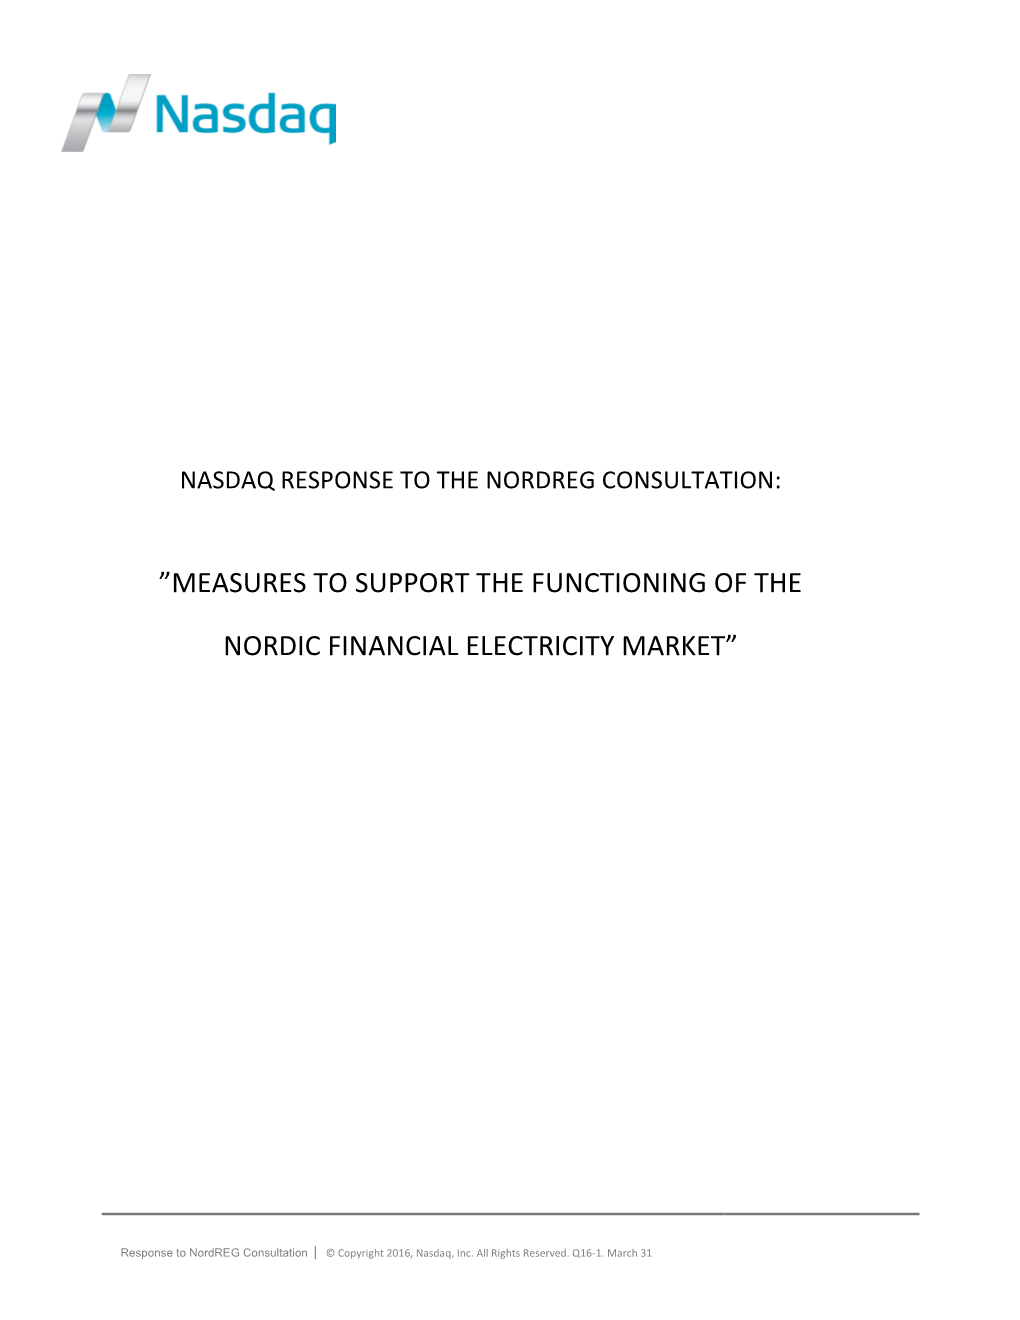 Measures to Support the Functioning of the Nordic Financial Electricity Market” by THEMA Consulting Group and Hagman Energy